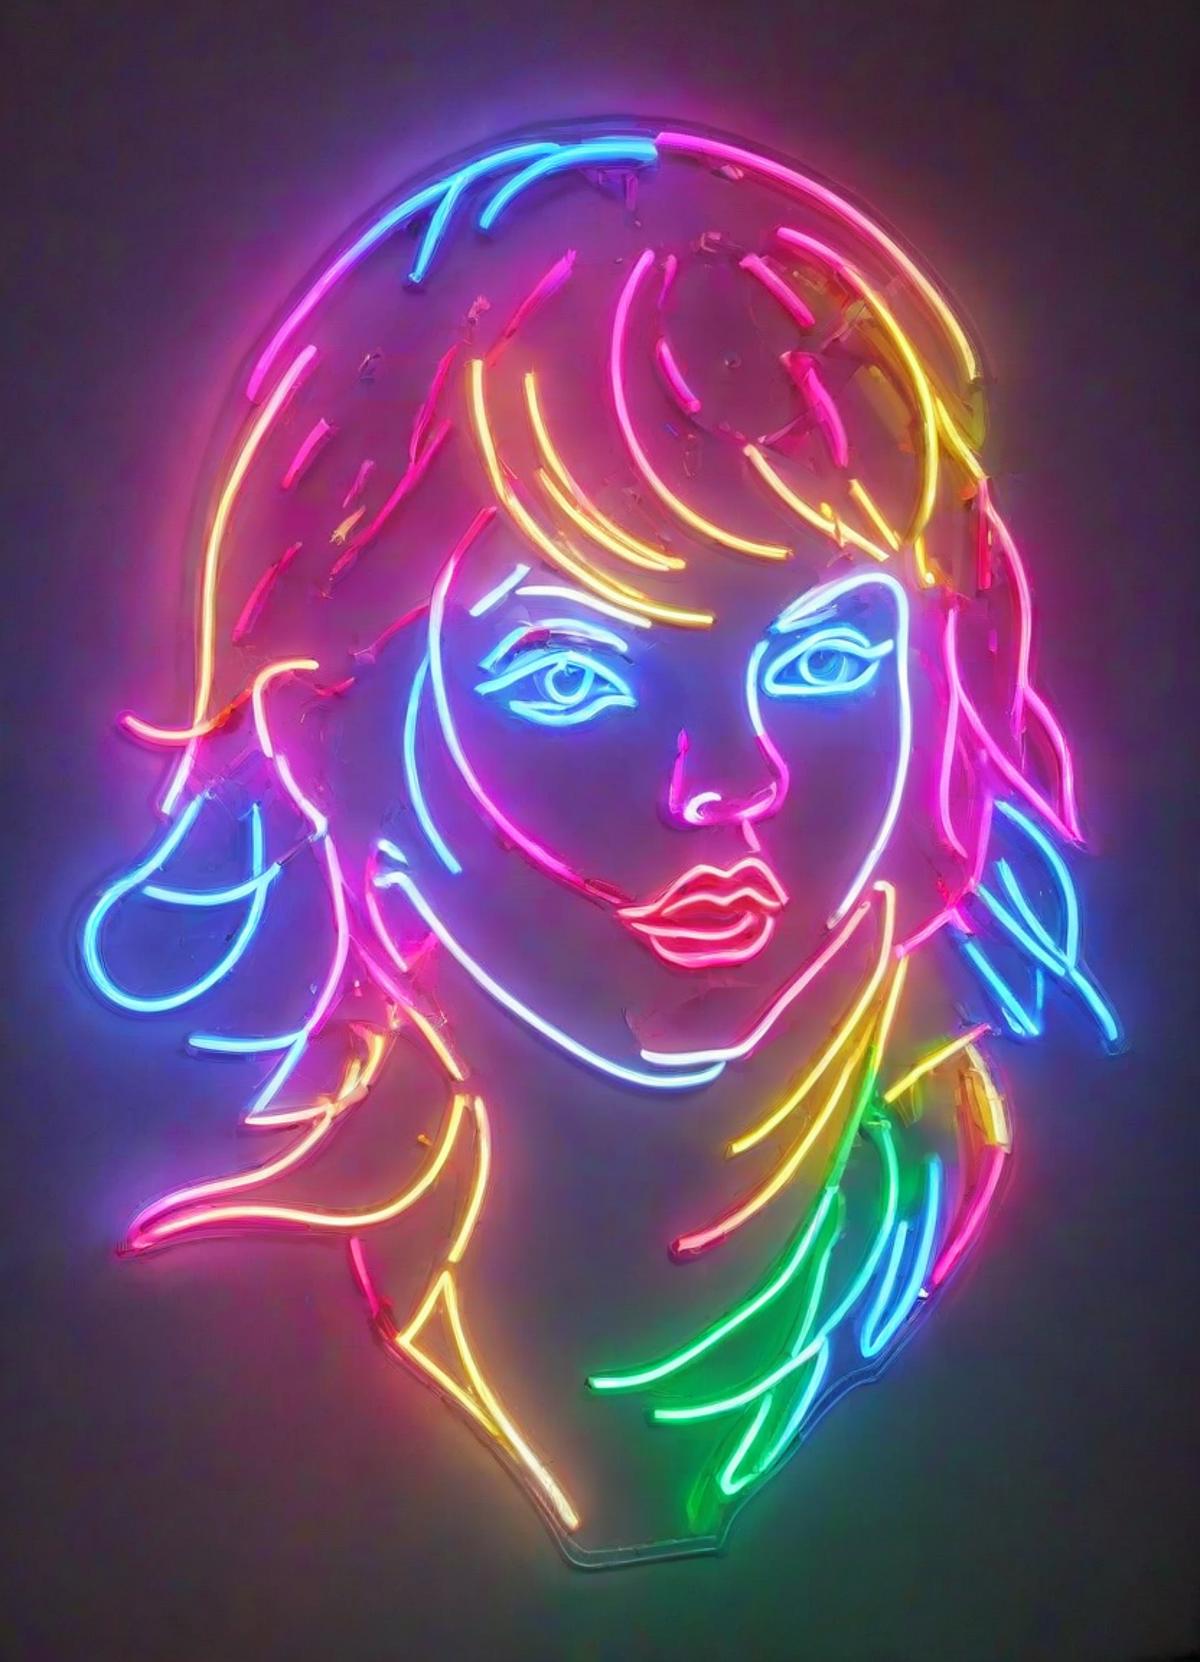 PE Neon Sign [Style] image by Proompt_Engineer